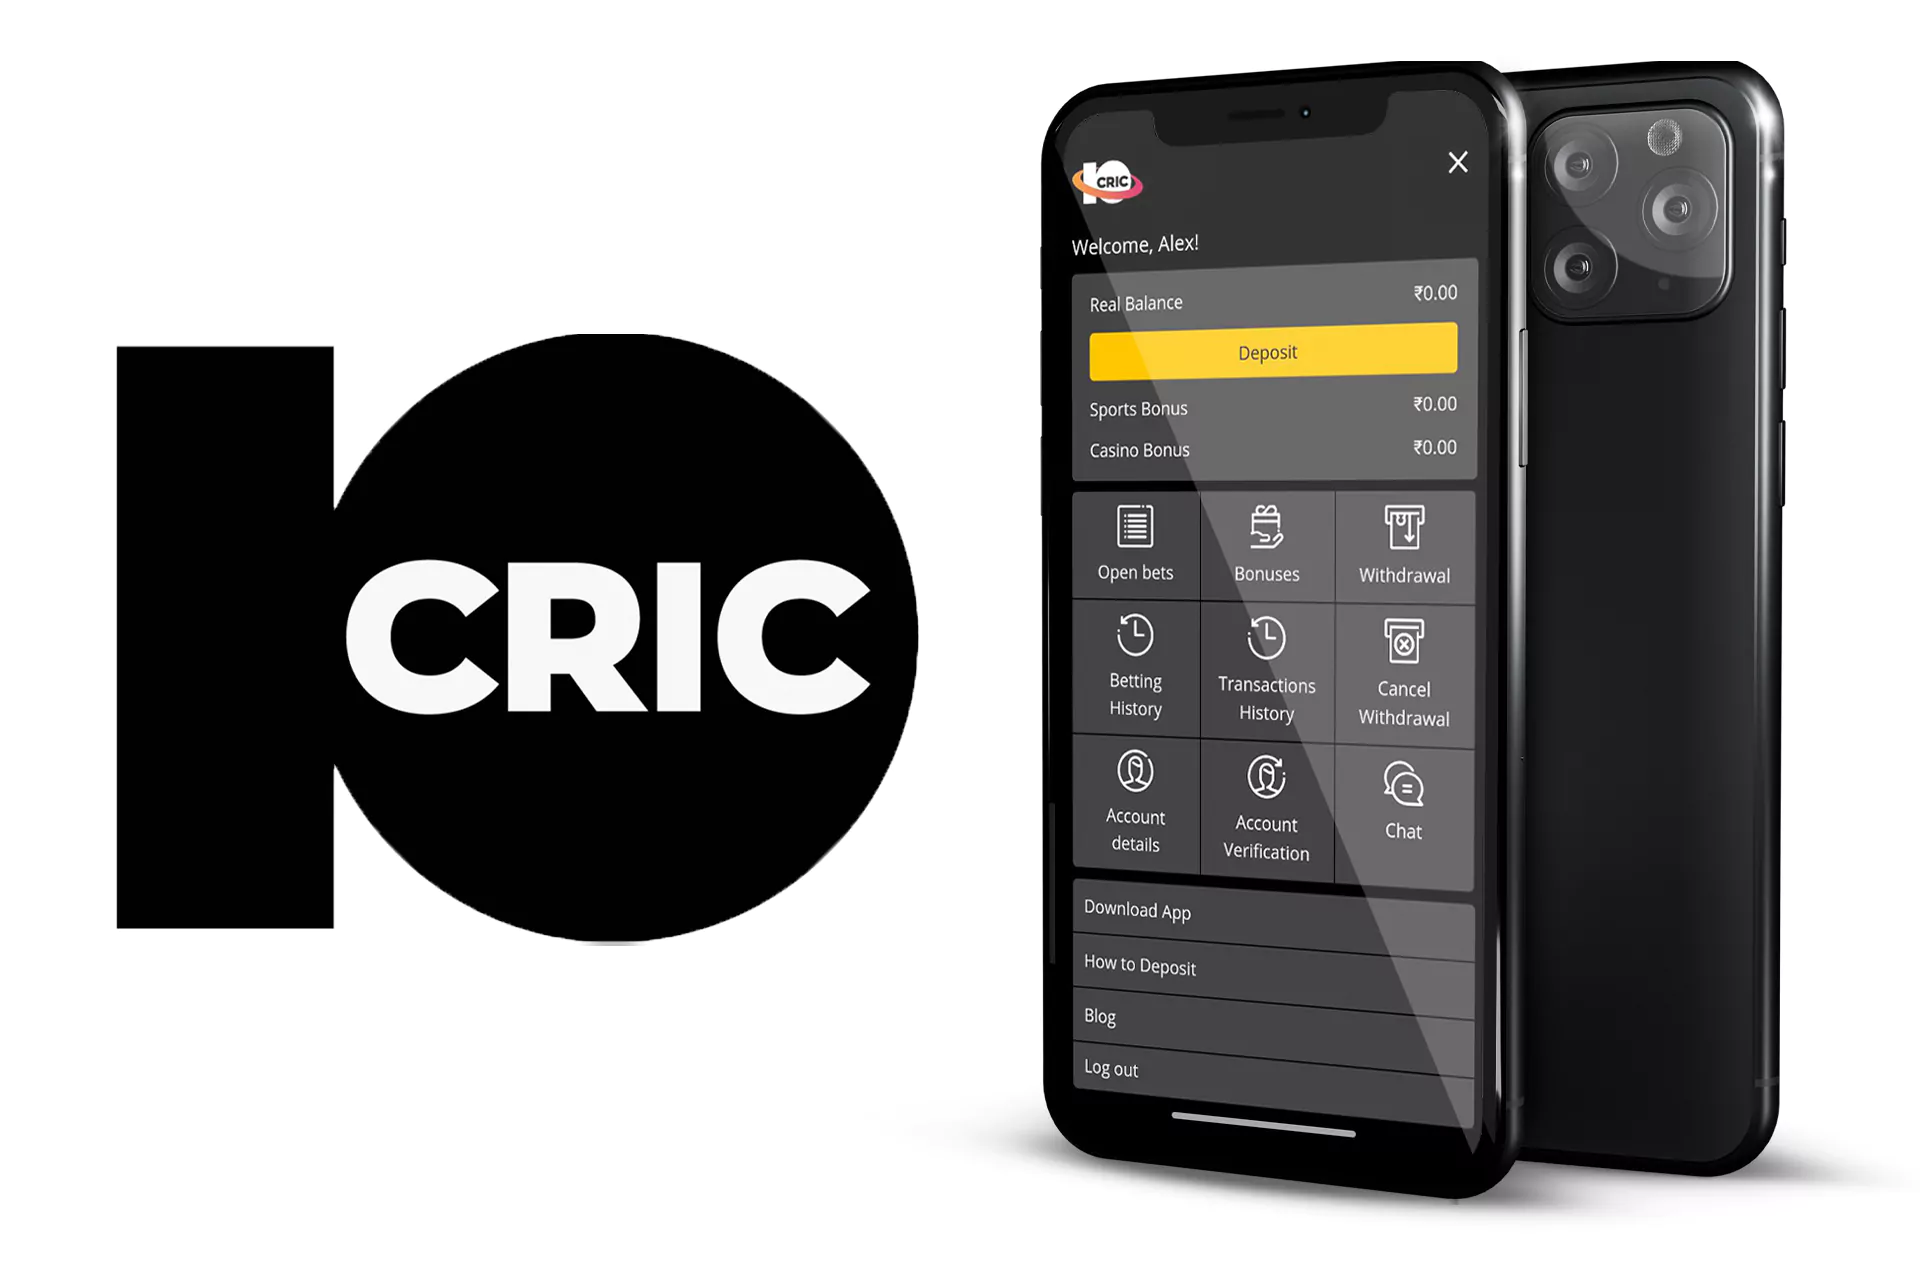 Cricket betting is available in the 10Cric app.